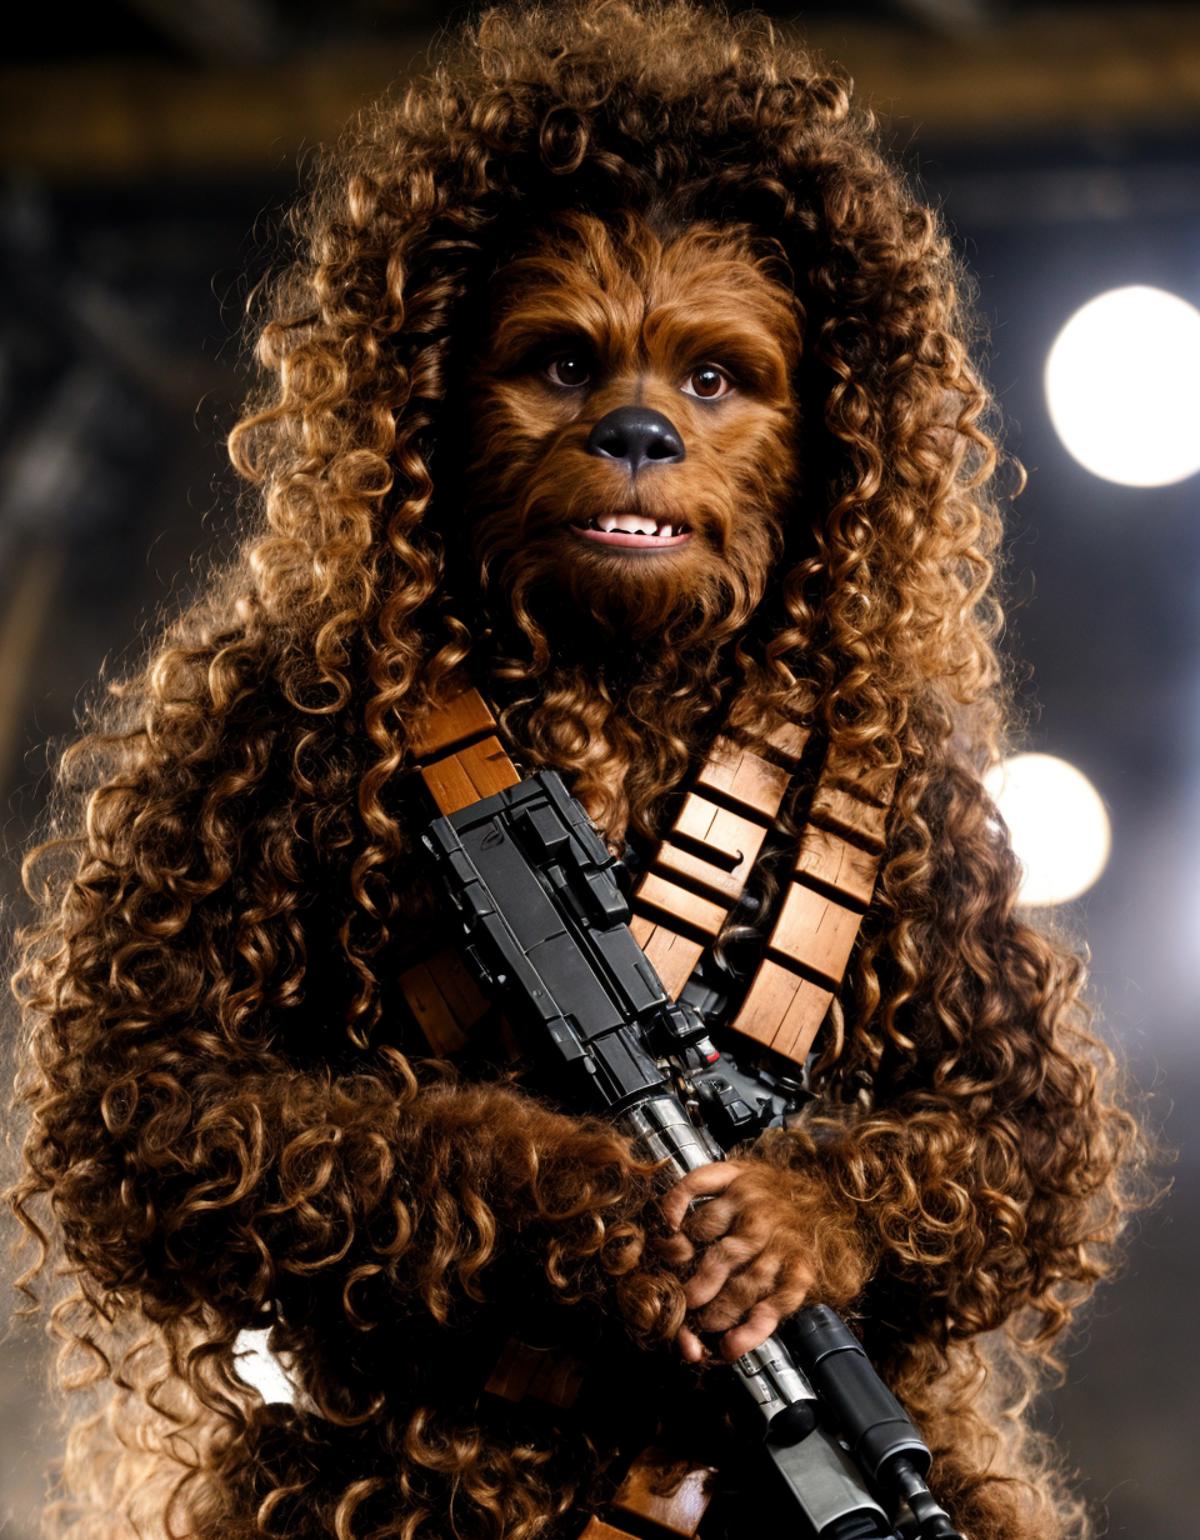 Curly-haired monkey with a gun, possibly a furry creature, standing in a room.